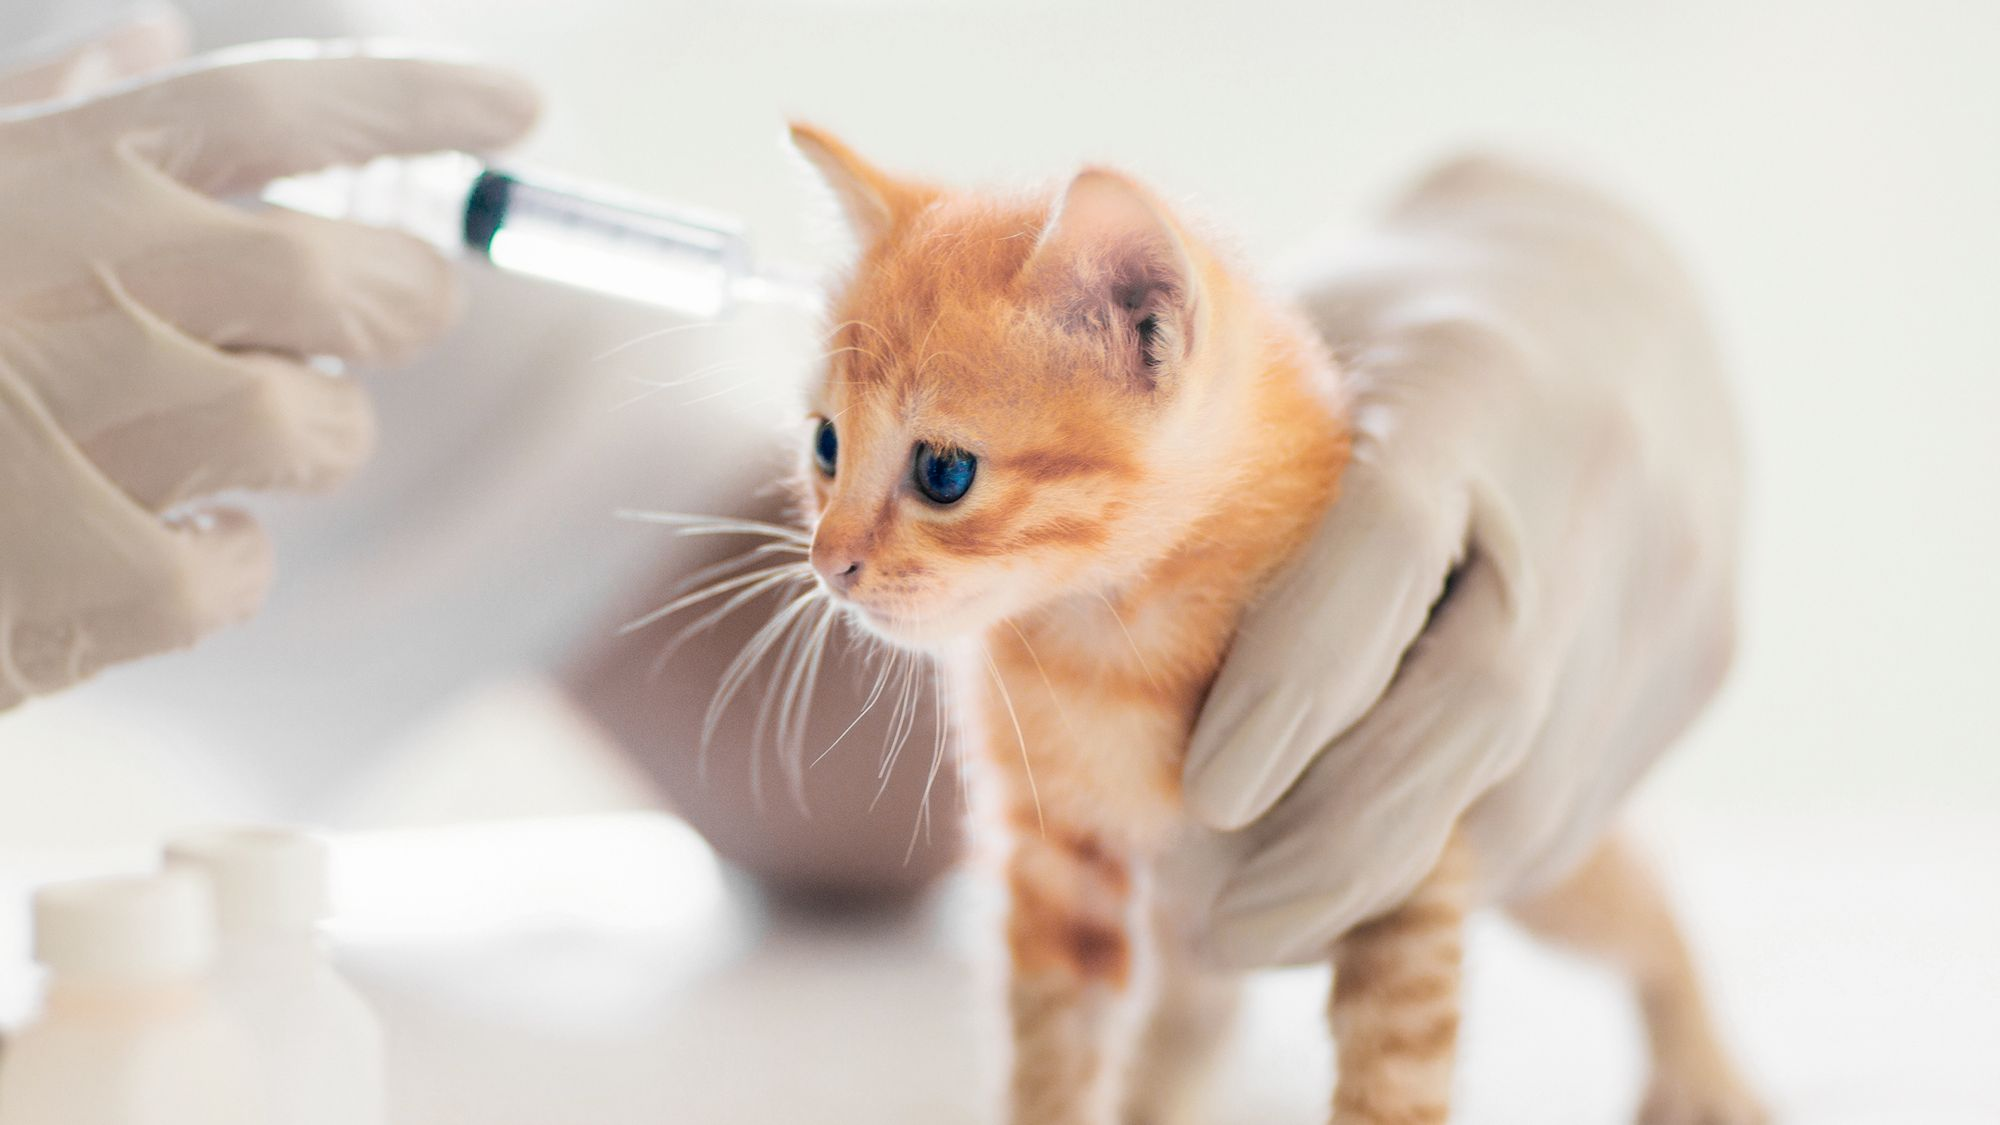 Ginger kitten standing on a table being examined by a vet